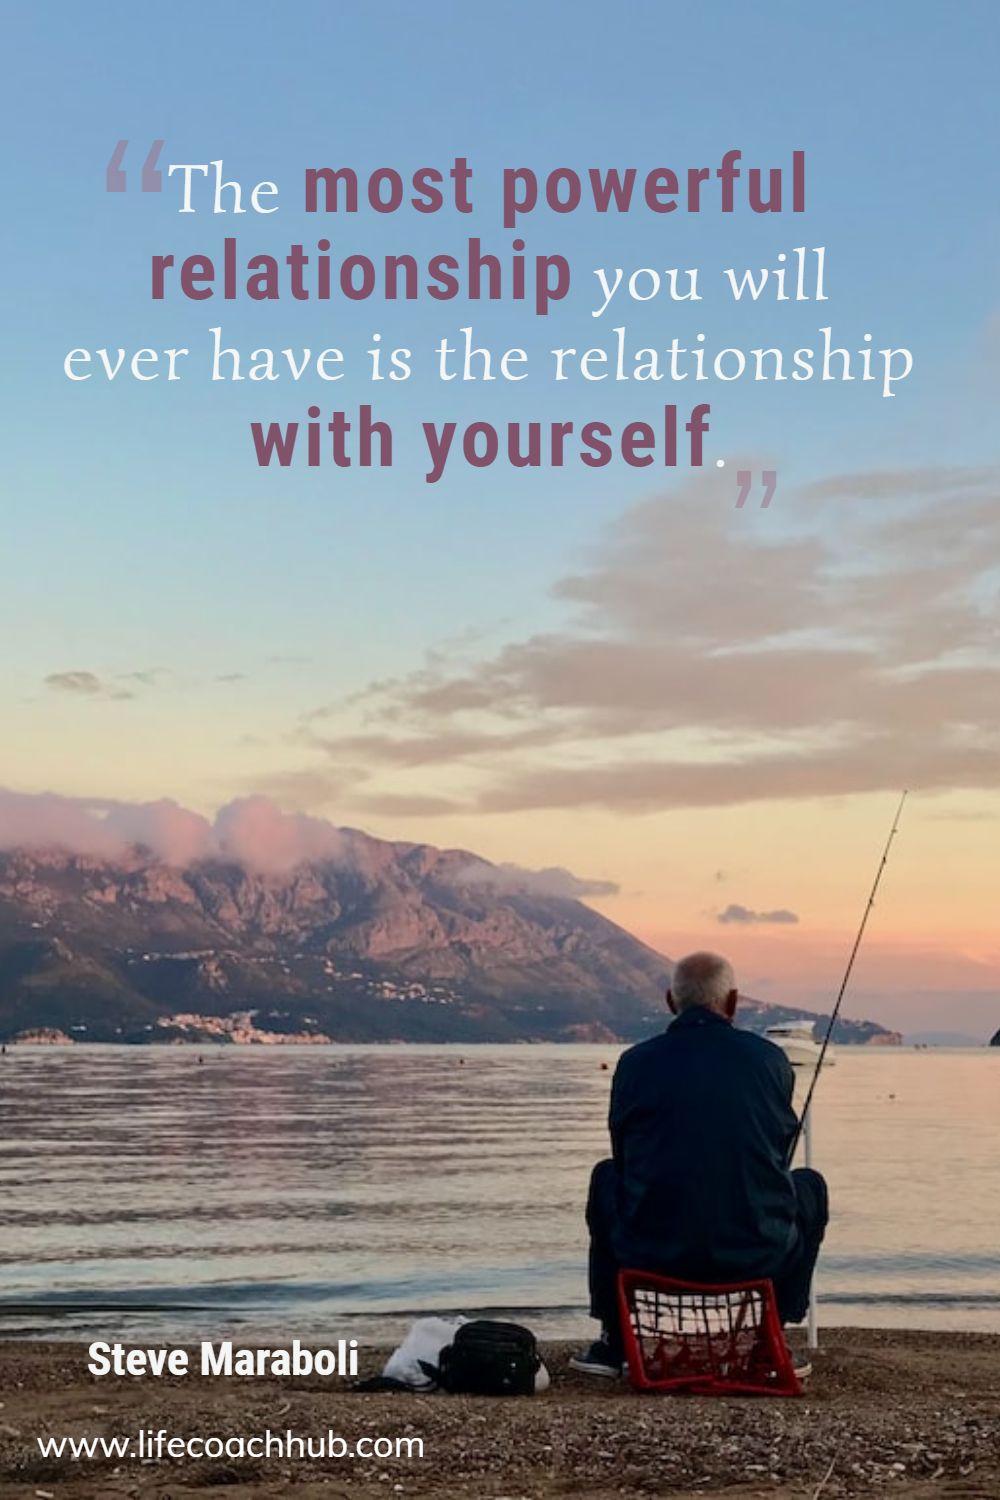 The most powerful relationship you will ever have is the relationship with yourself.	Steve Maraboli Coaching Quote